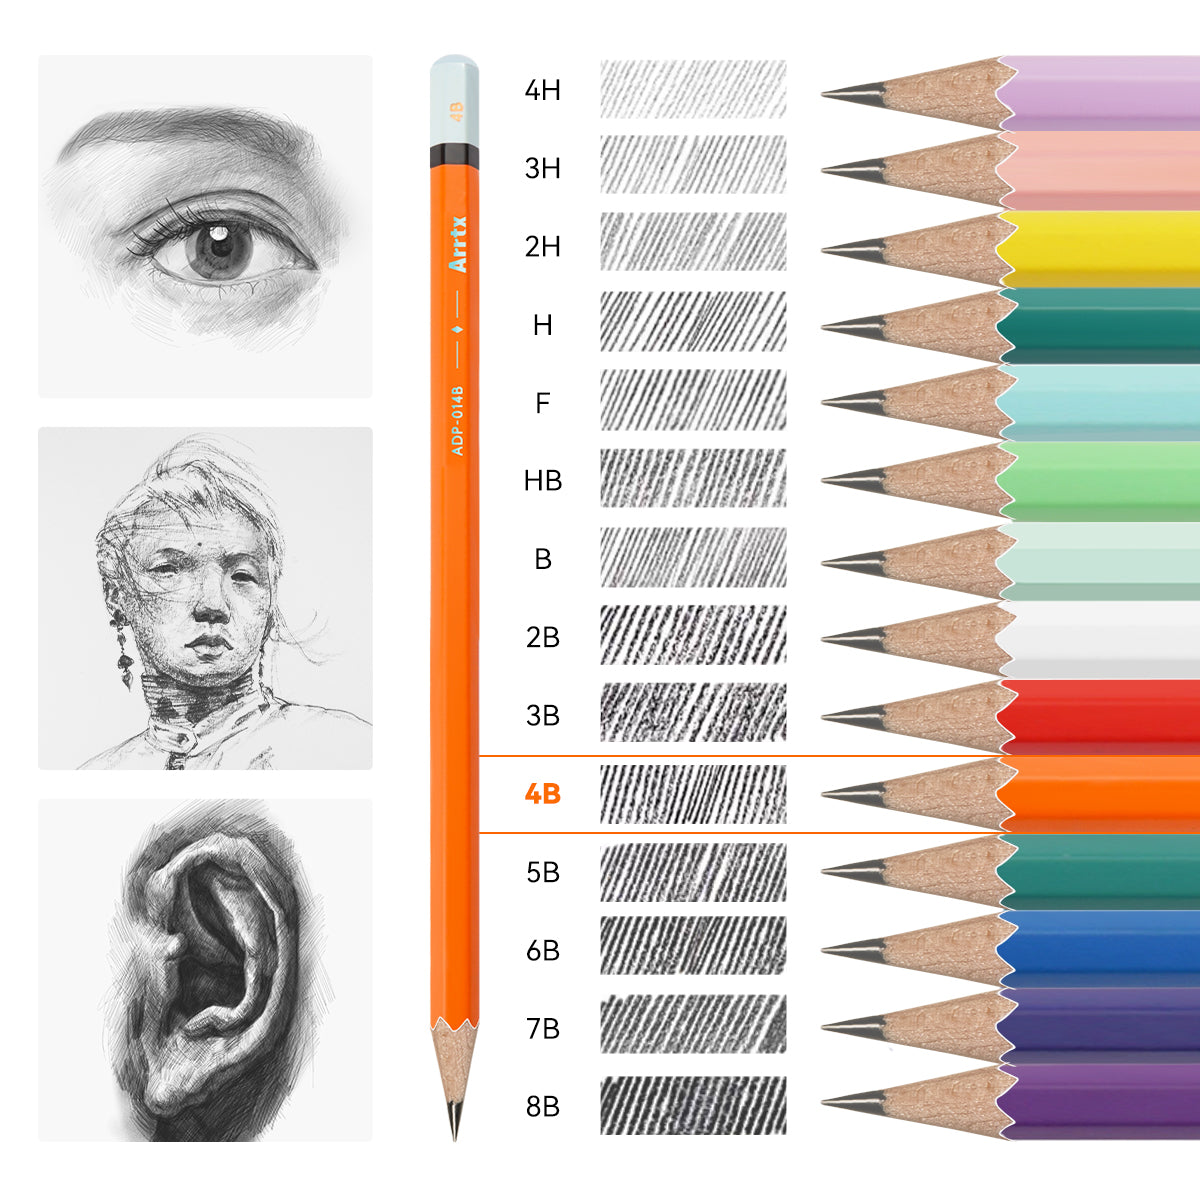 Drawing Pencils for Sketching - 14 Pieces Sketch Pencils, Graphite Pencils, Shading  Pencils for Drawing, Basic Sketching Pencils for Beginners and Artists :  : Home